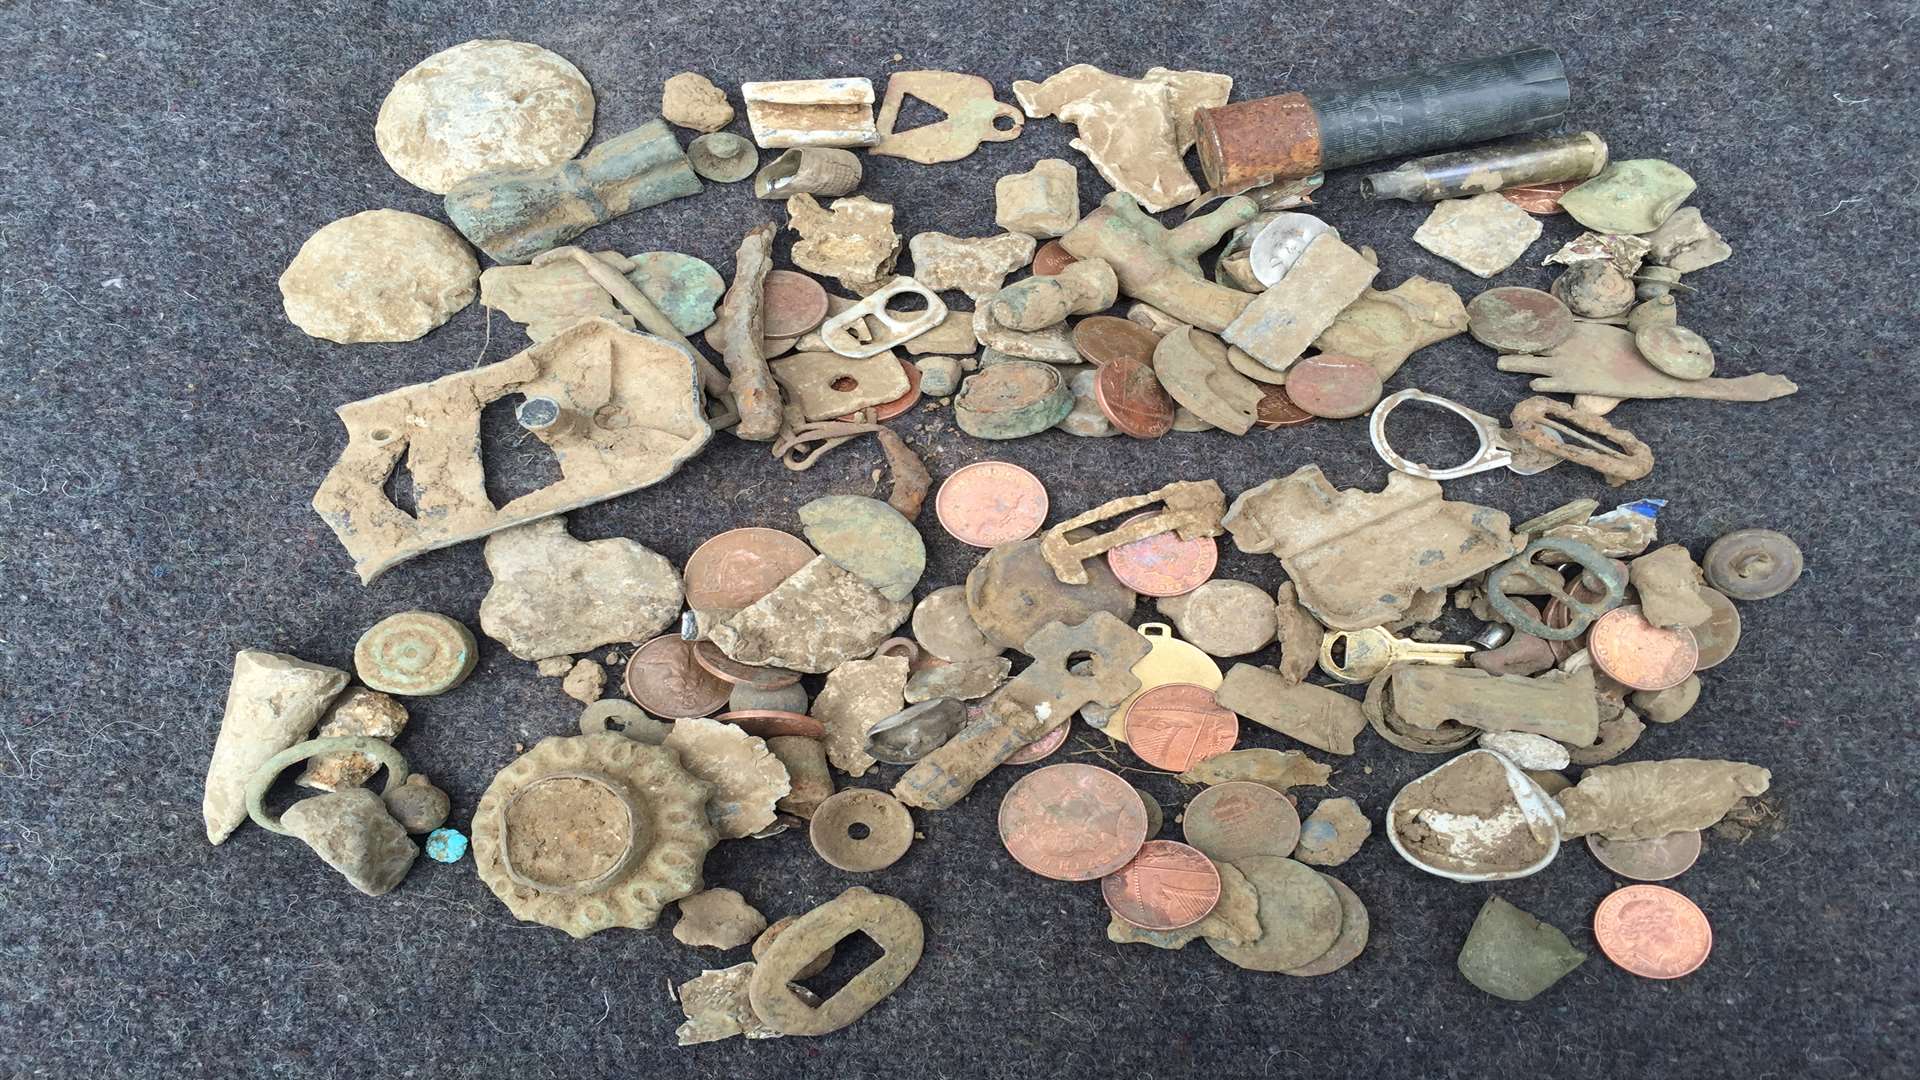 Some of the artefacts seized by police